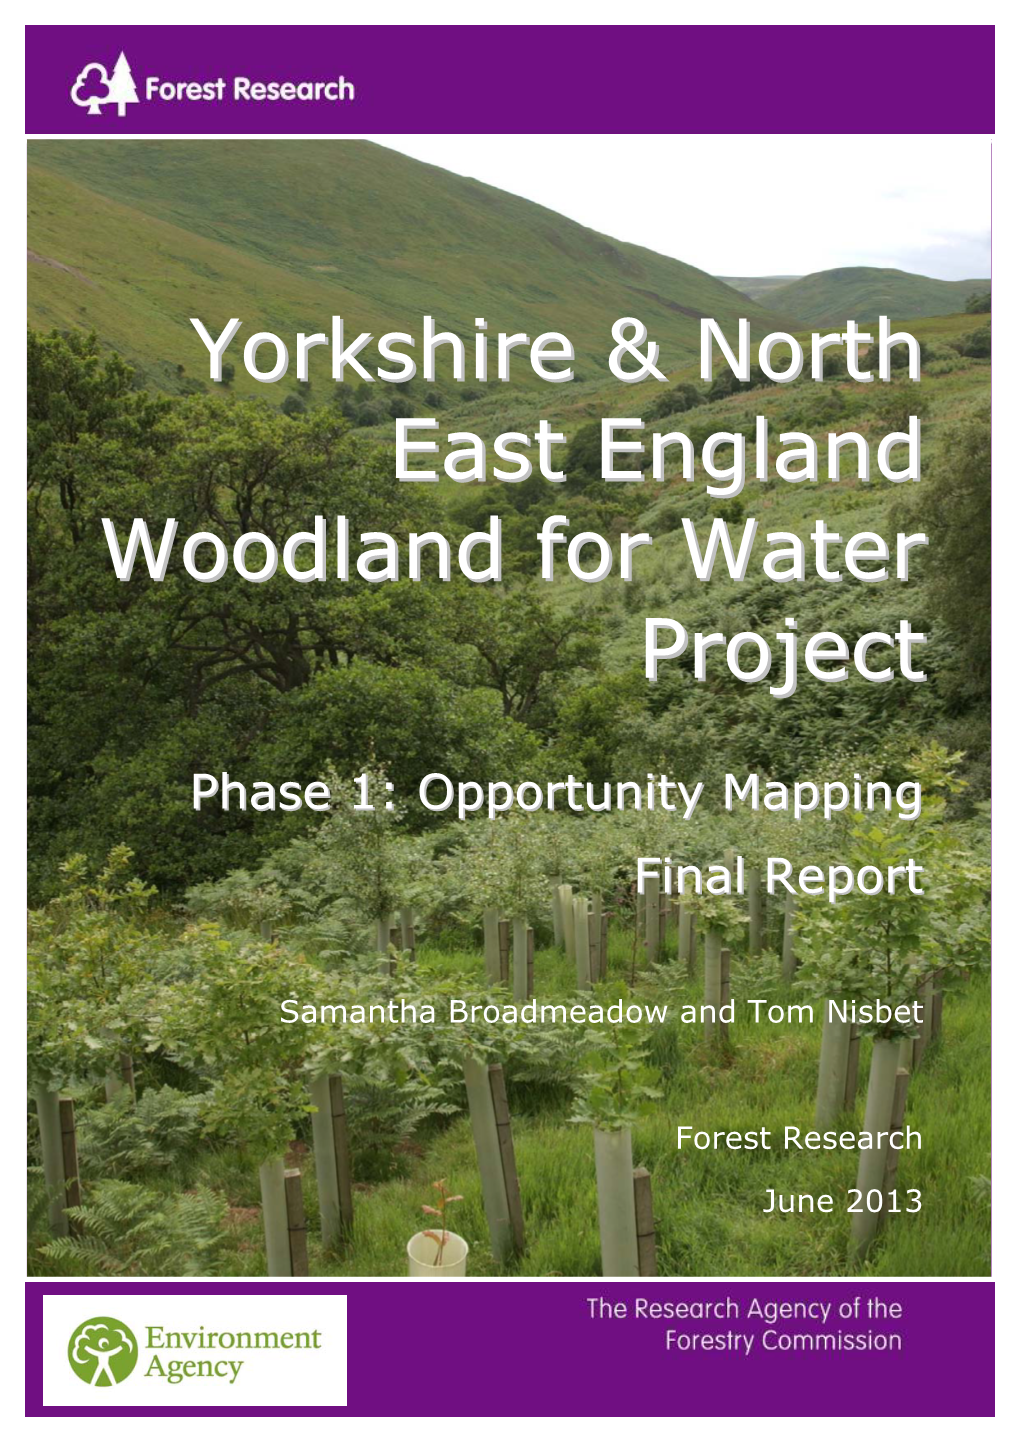 Yorkshire & North East England Woodland for Water Project, Phase 1: Opportunity Mapping